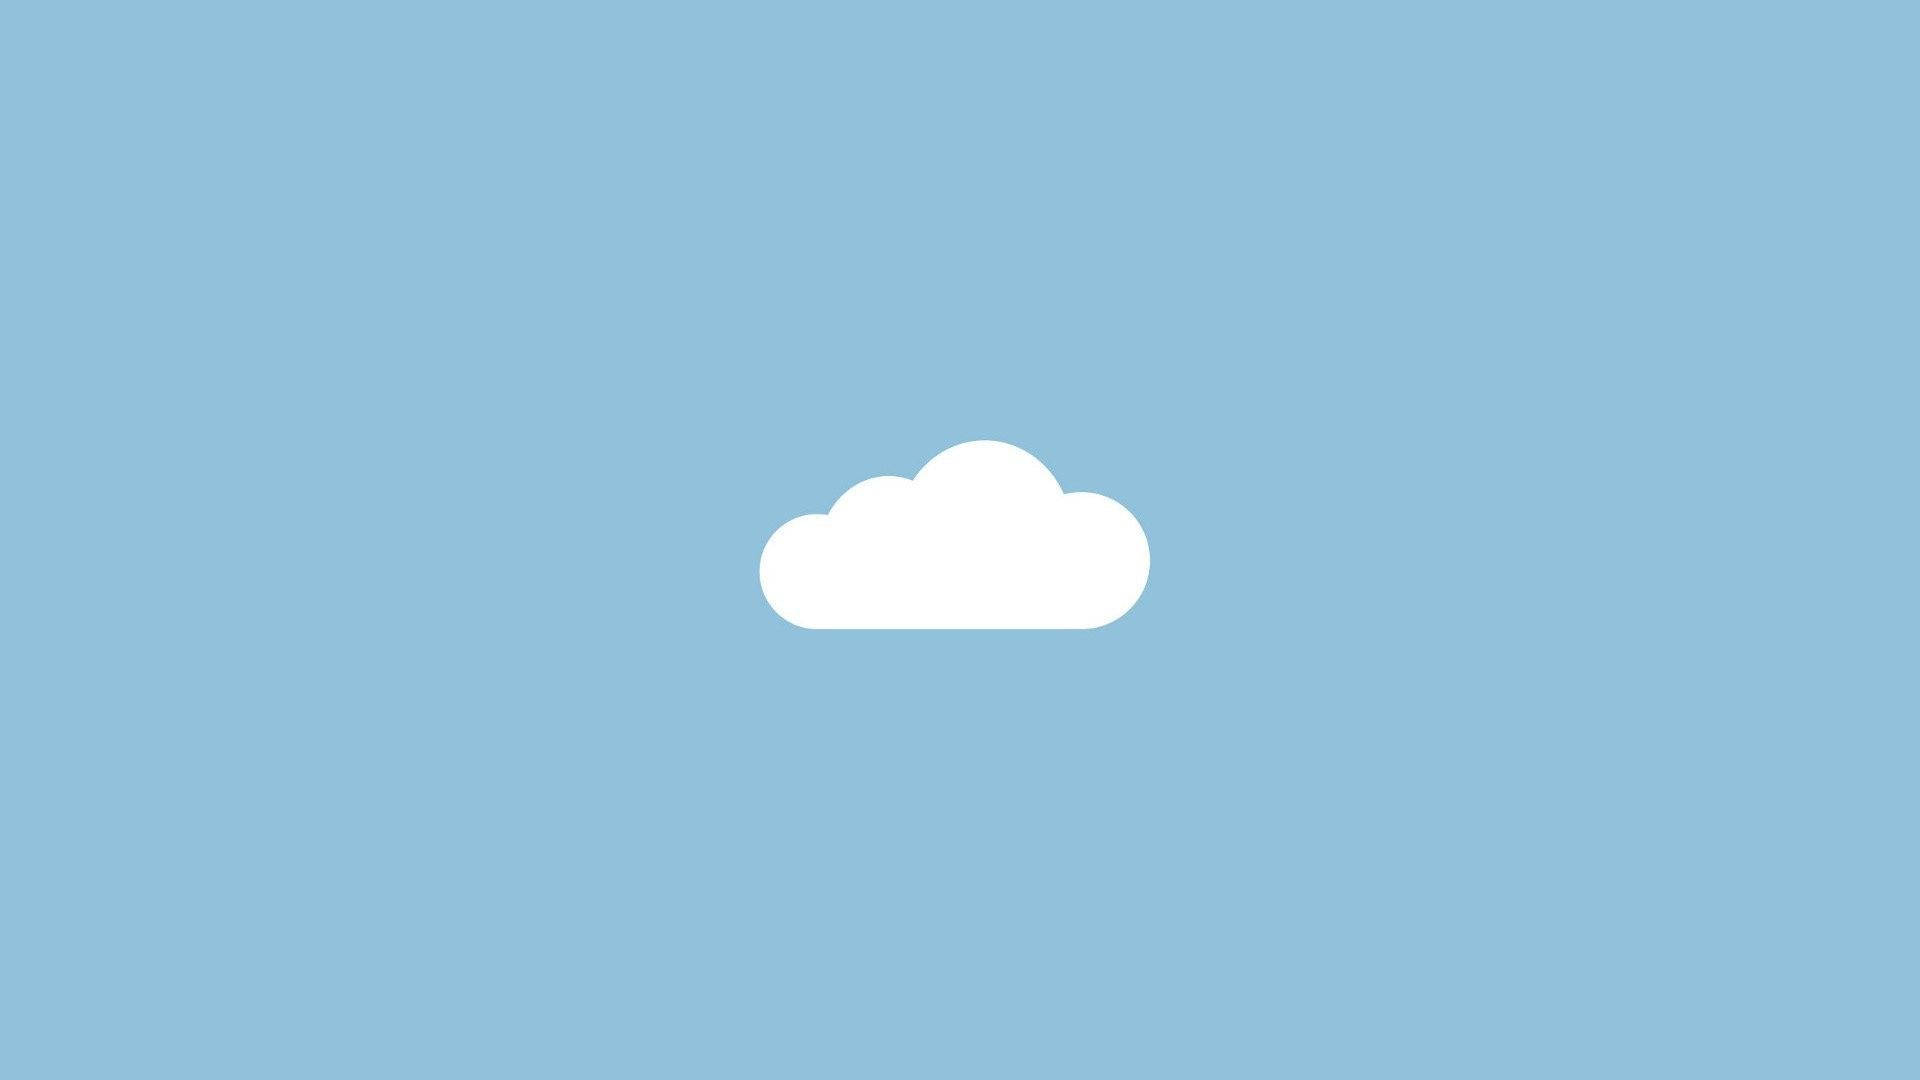 Simple Blue Aesthetic Lone Cloud Background